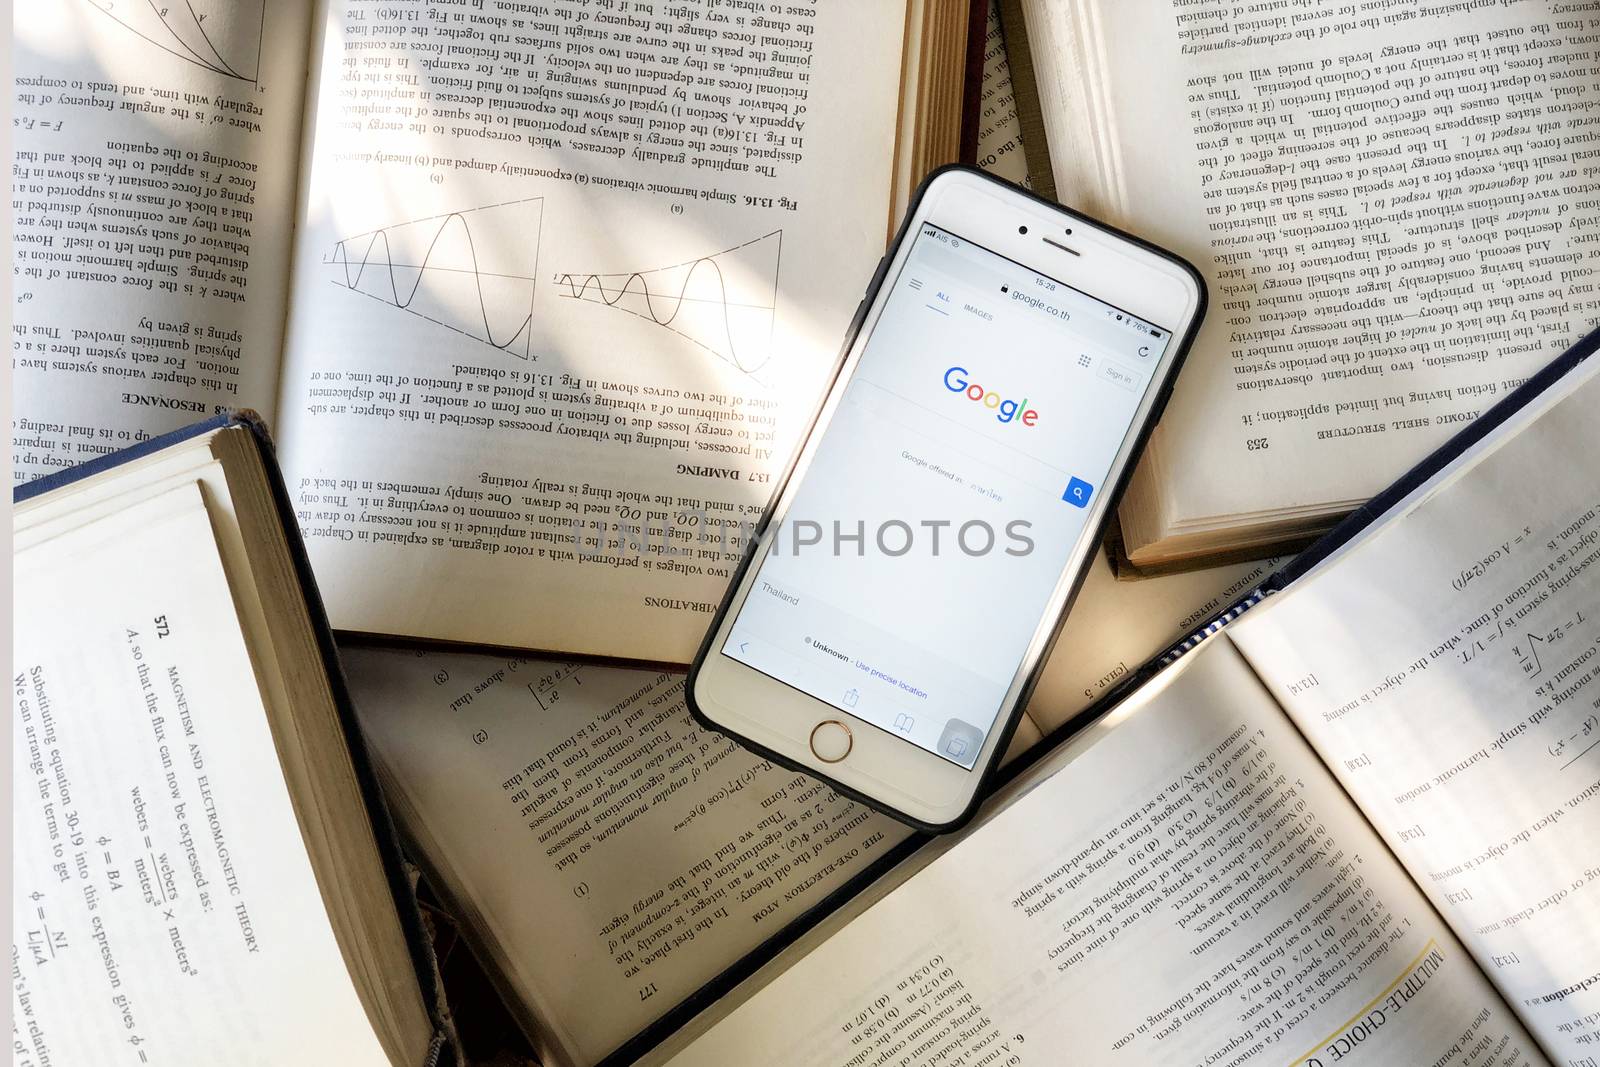 Bangkok, Thailand - 21 February: Close up the new and old student tools for information seeking, using the most popular internet search engine "Google Web Browser" on smartphone and using the old model of reading books in library.